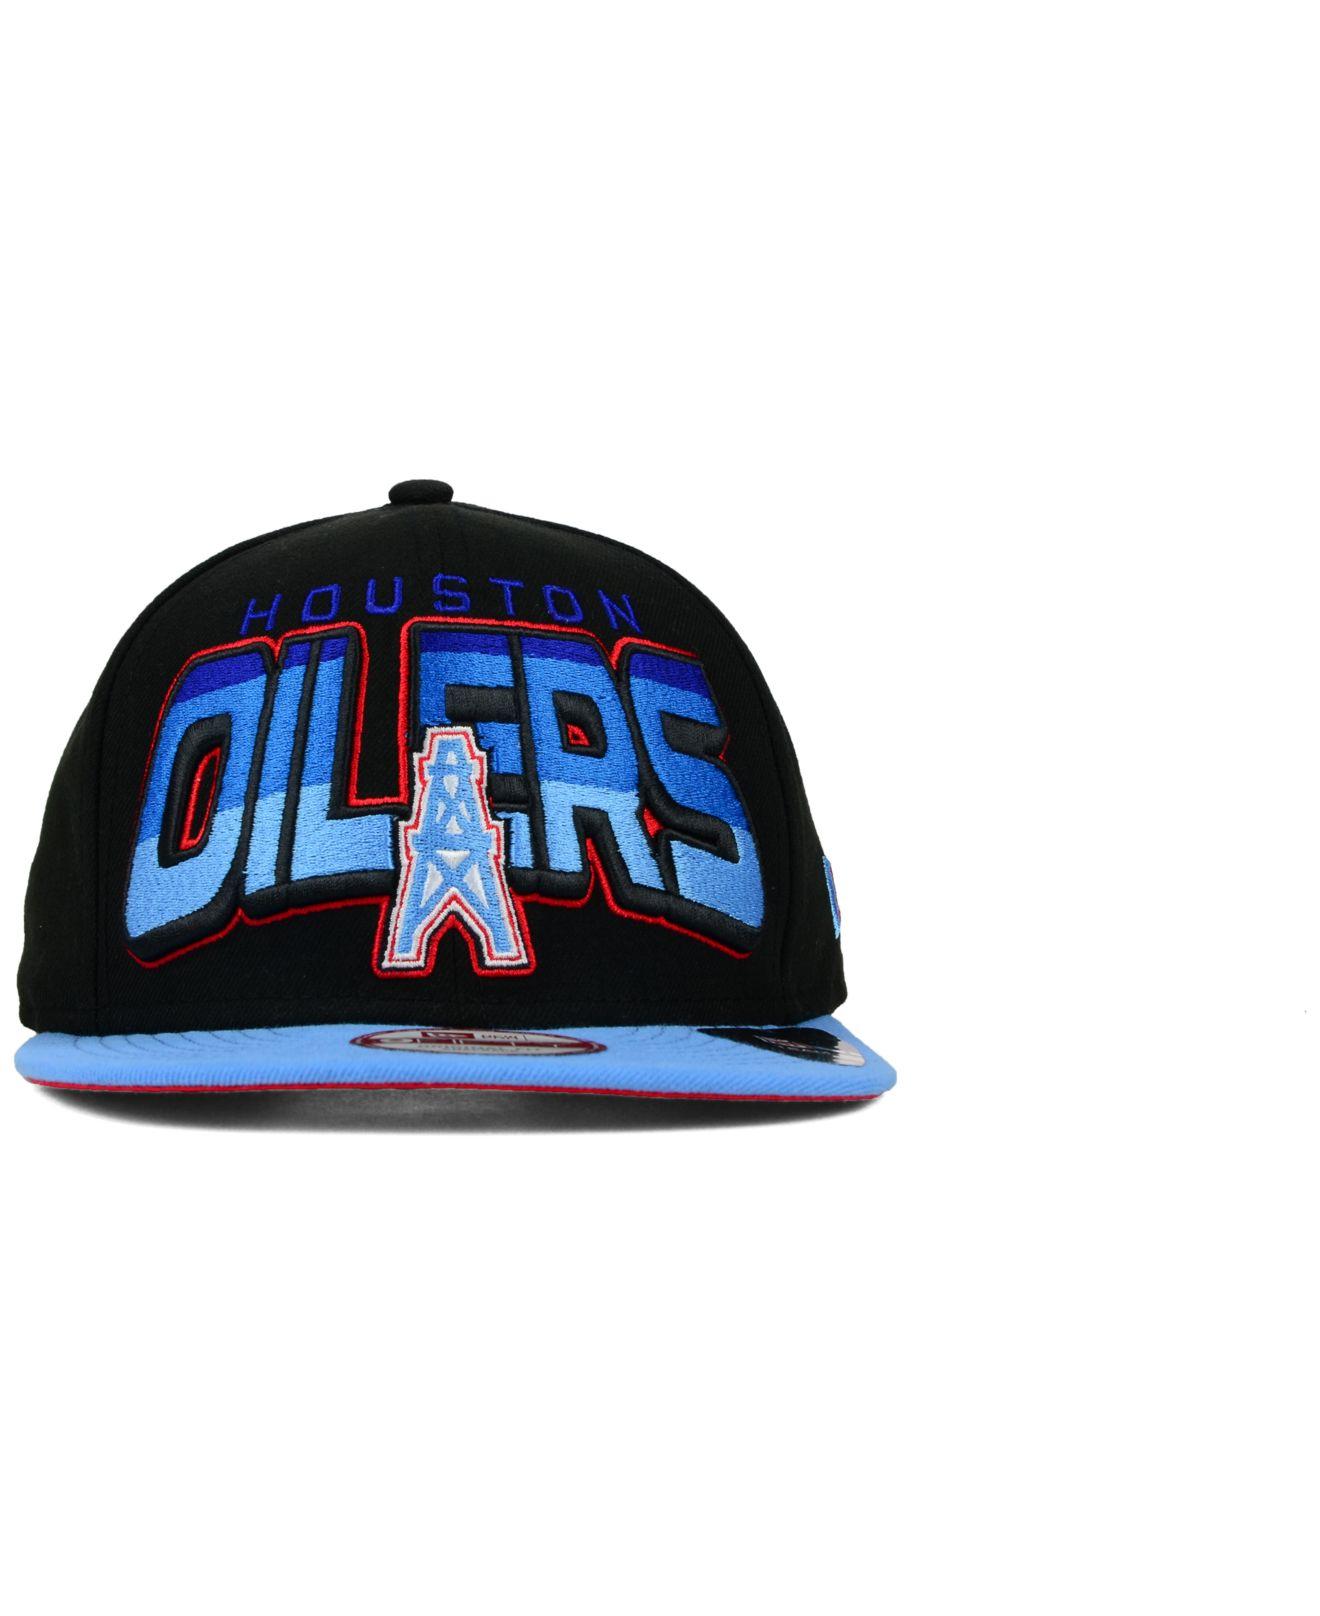 KTZ Houston Oilers All Colors 9fifty Snapback Cap in Blue for Men